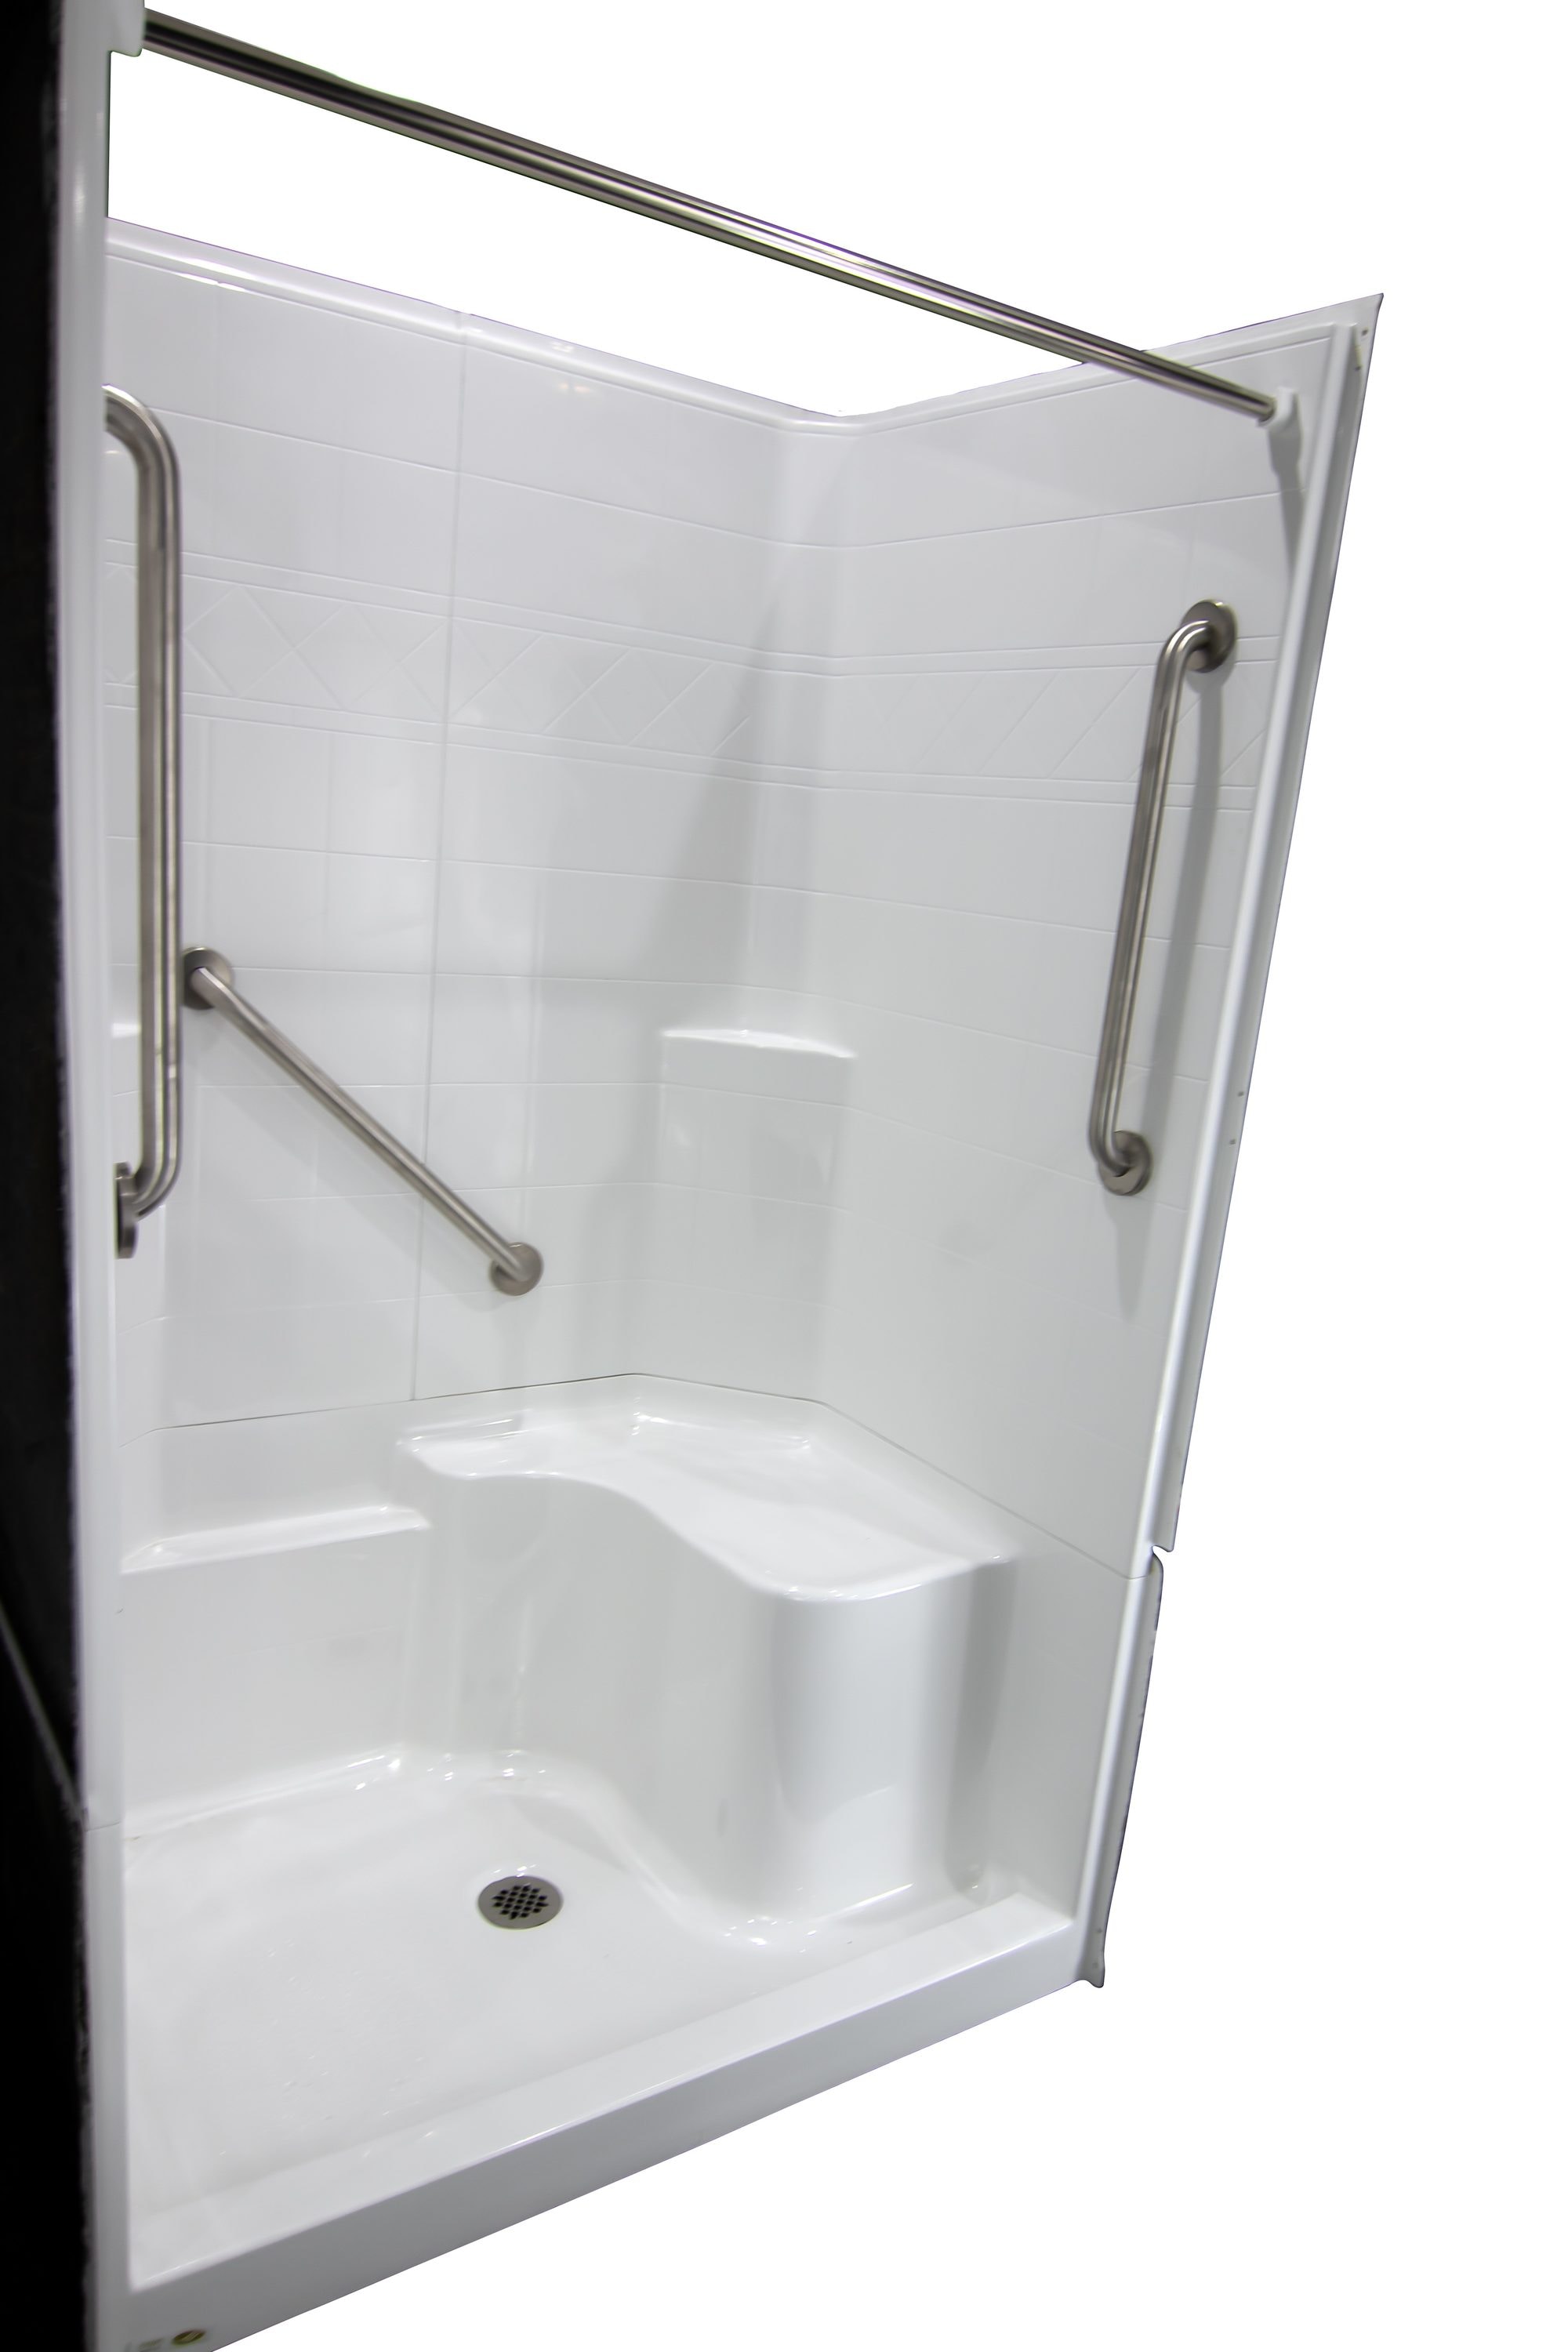 Laurel Mountain Ramer Low Threshold White 4-Piece 60-in x 32-in x 77-in Base/Wall Alcove Shower Kit with Integrated Seat (Right Drain) Drain Included